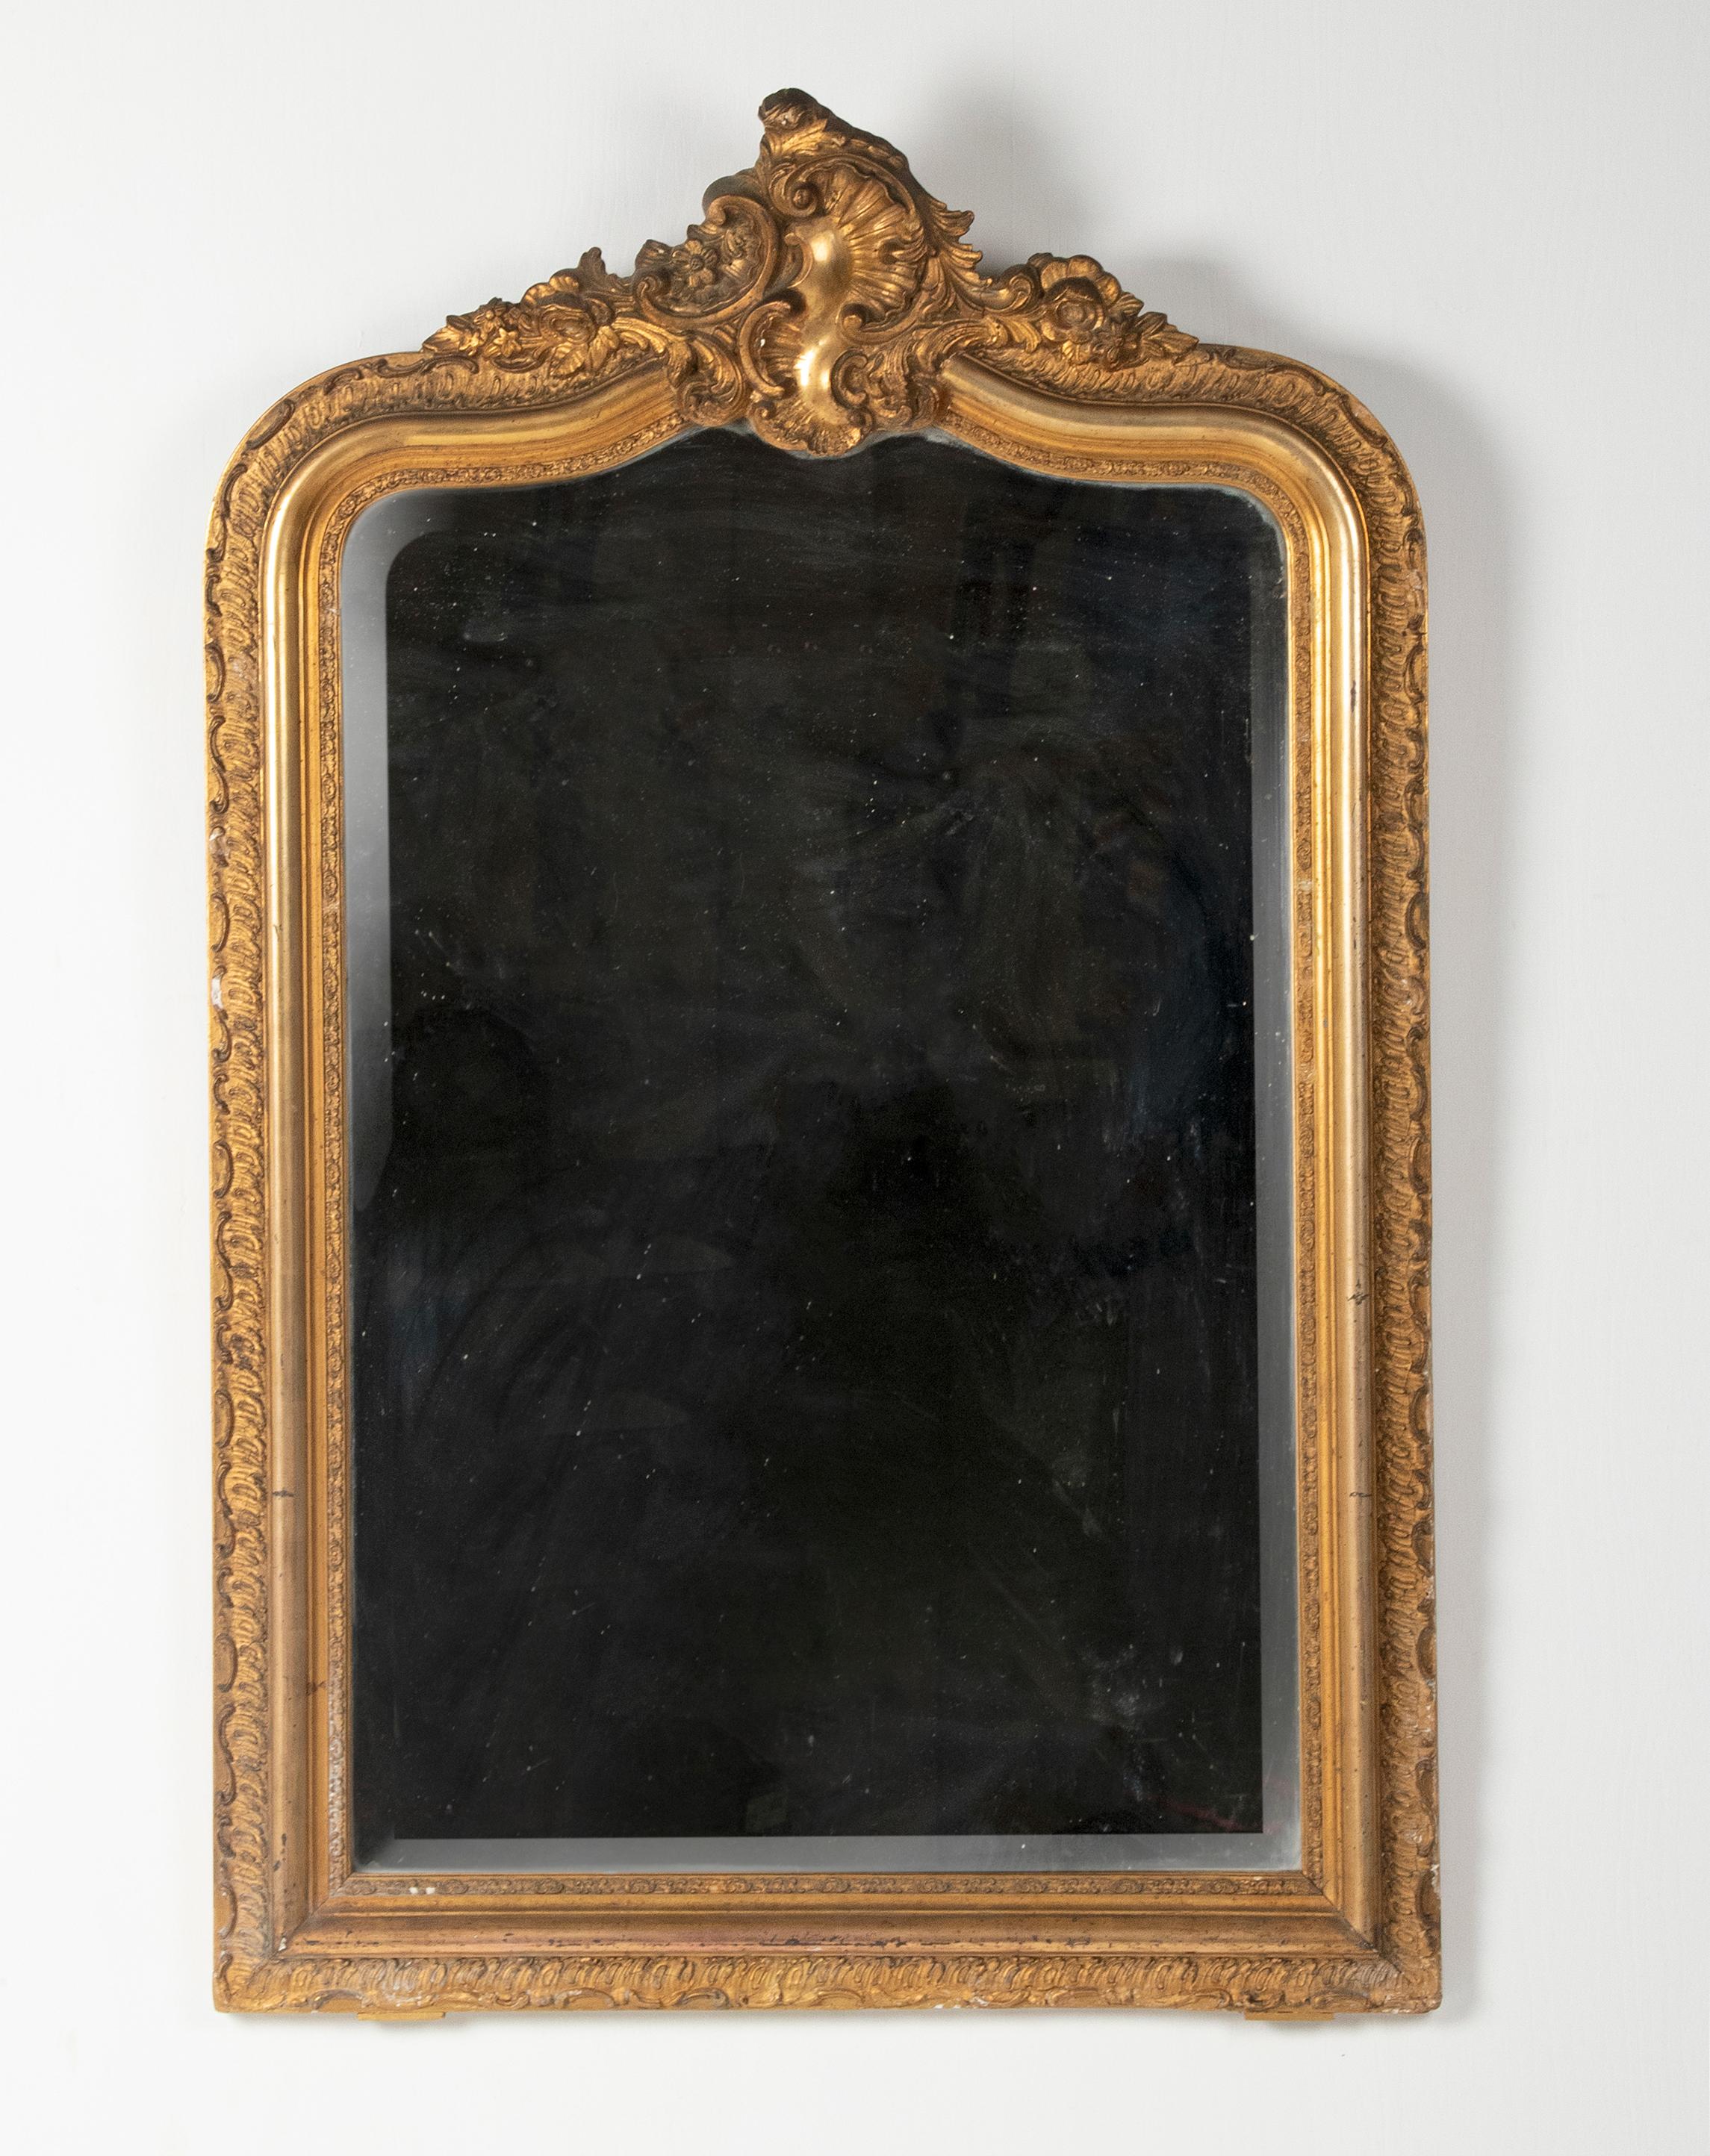 Beautiful antique French mirror. The mirror is made of wood, decorated with stucco and partly (the middle part of the frame) gilded with gold leaf. The mirror has a beautiful relief motif in the frame and an elegant crown. The glass is facet cut,